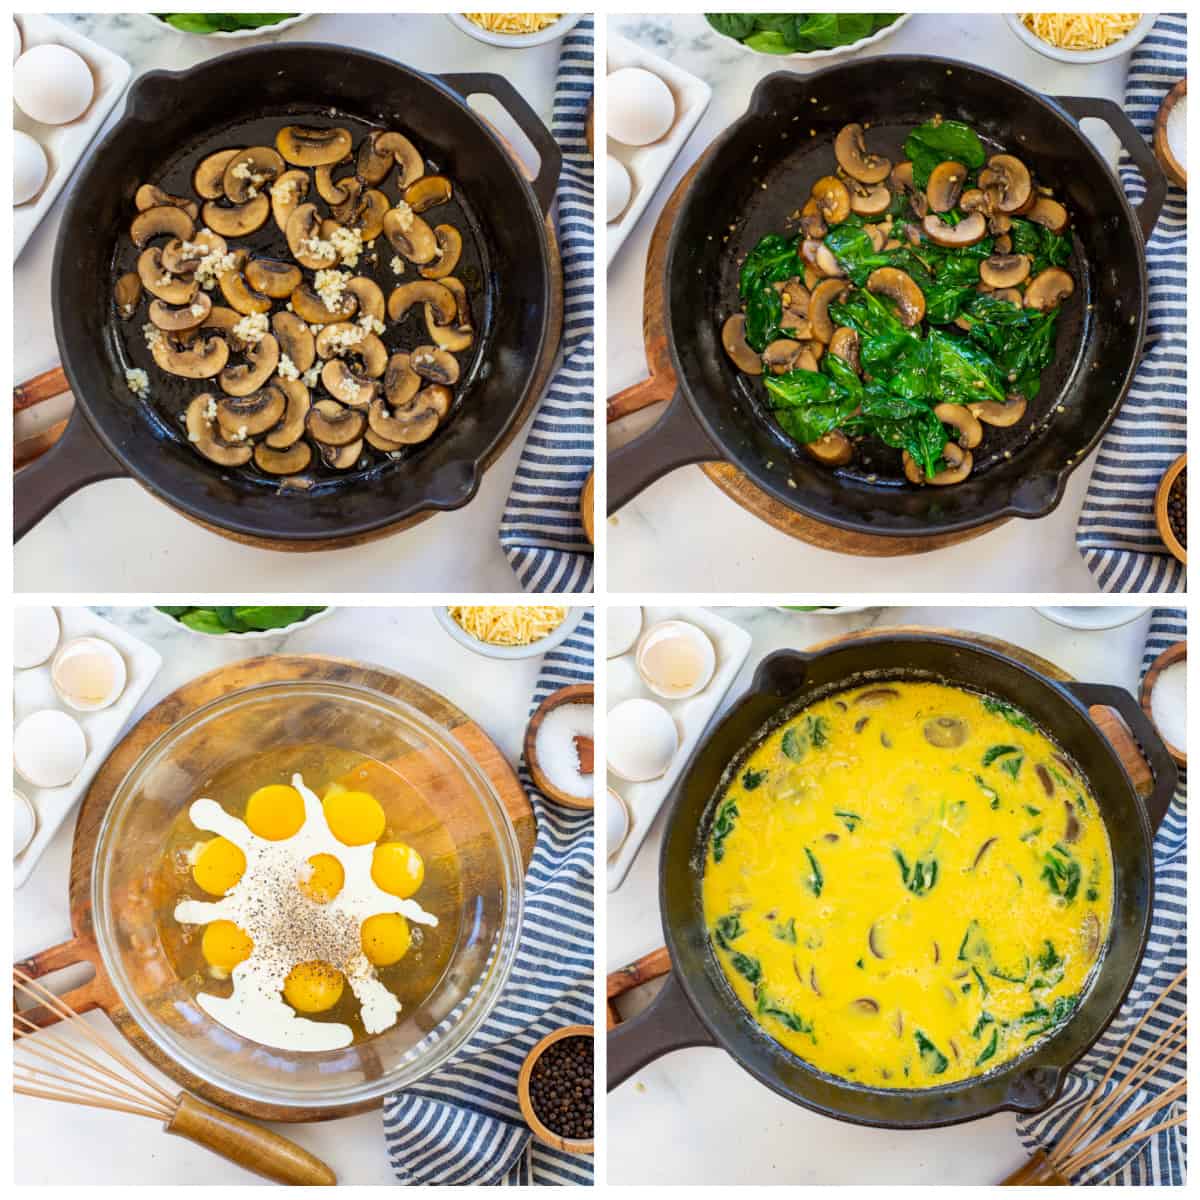 Collage showing how to make mushroom frittata.